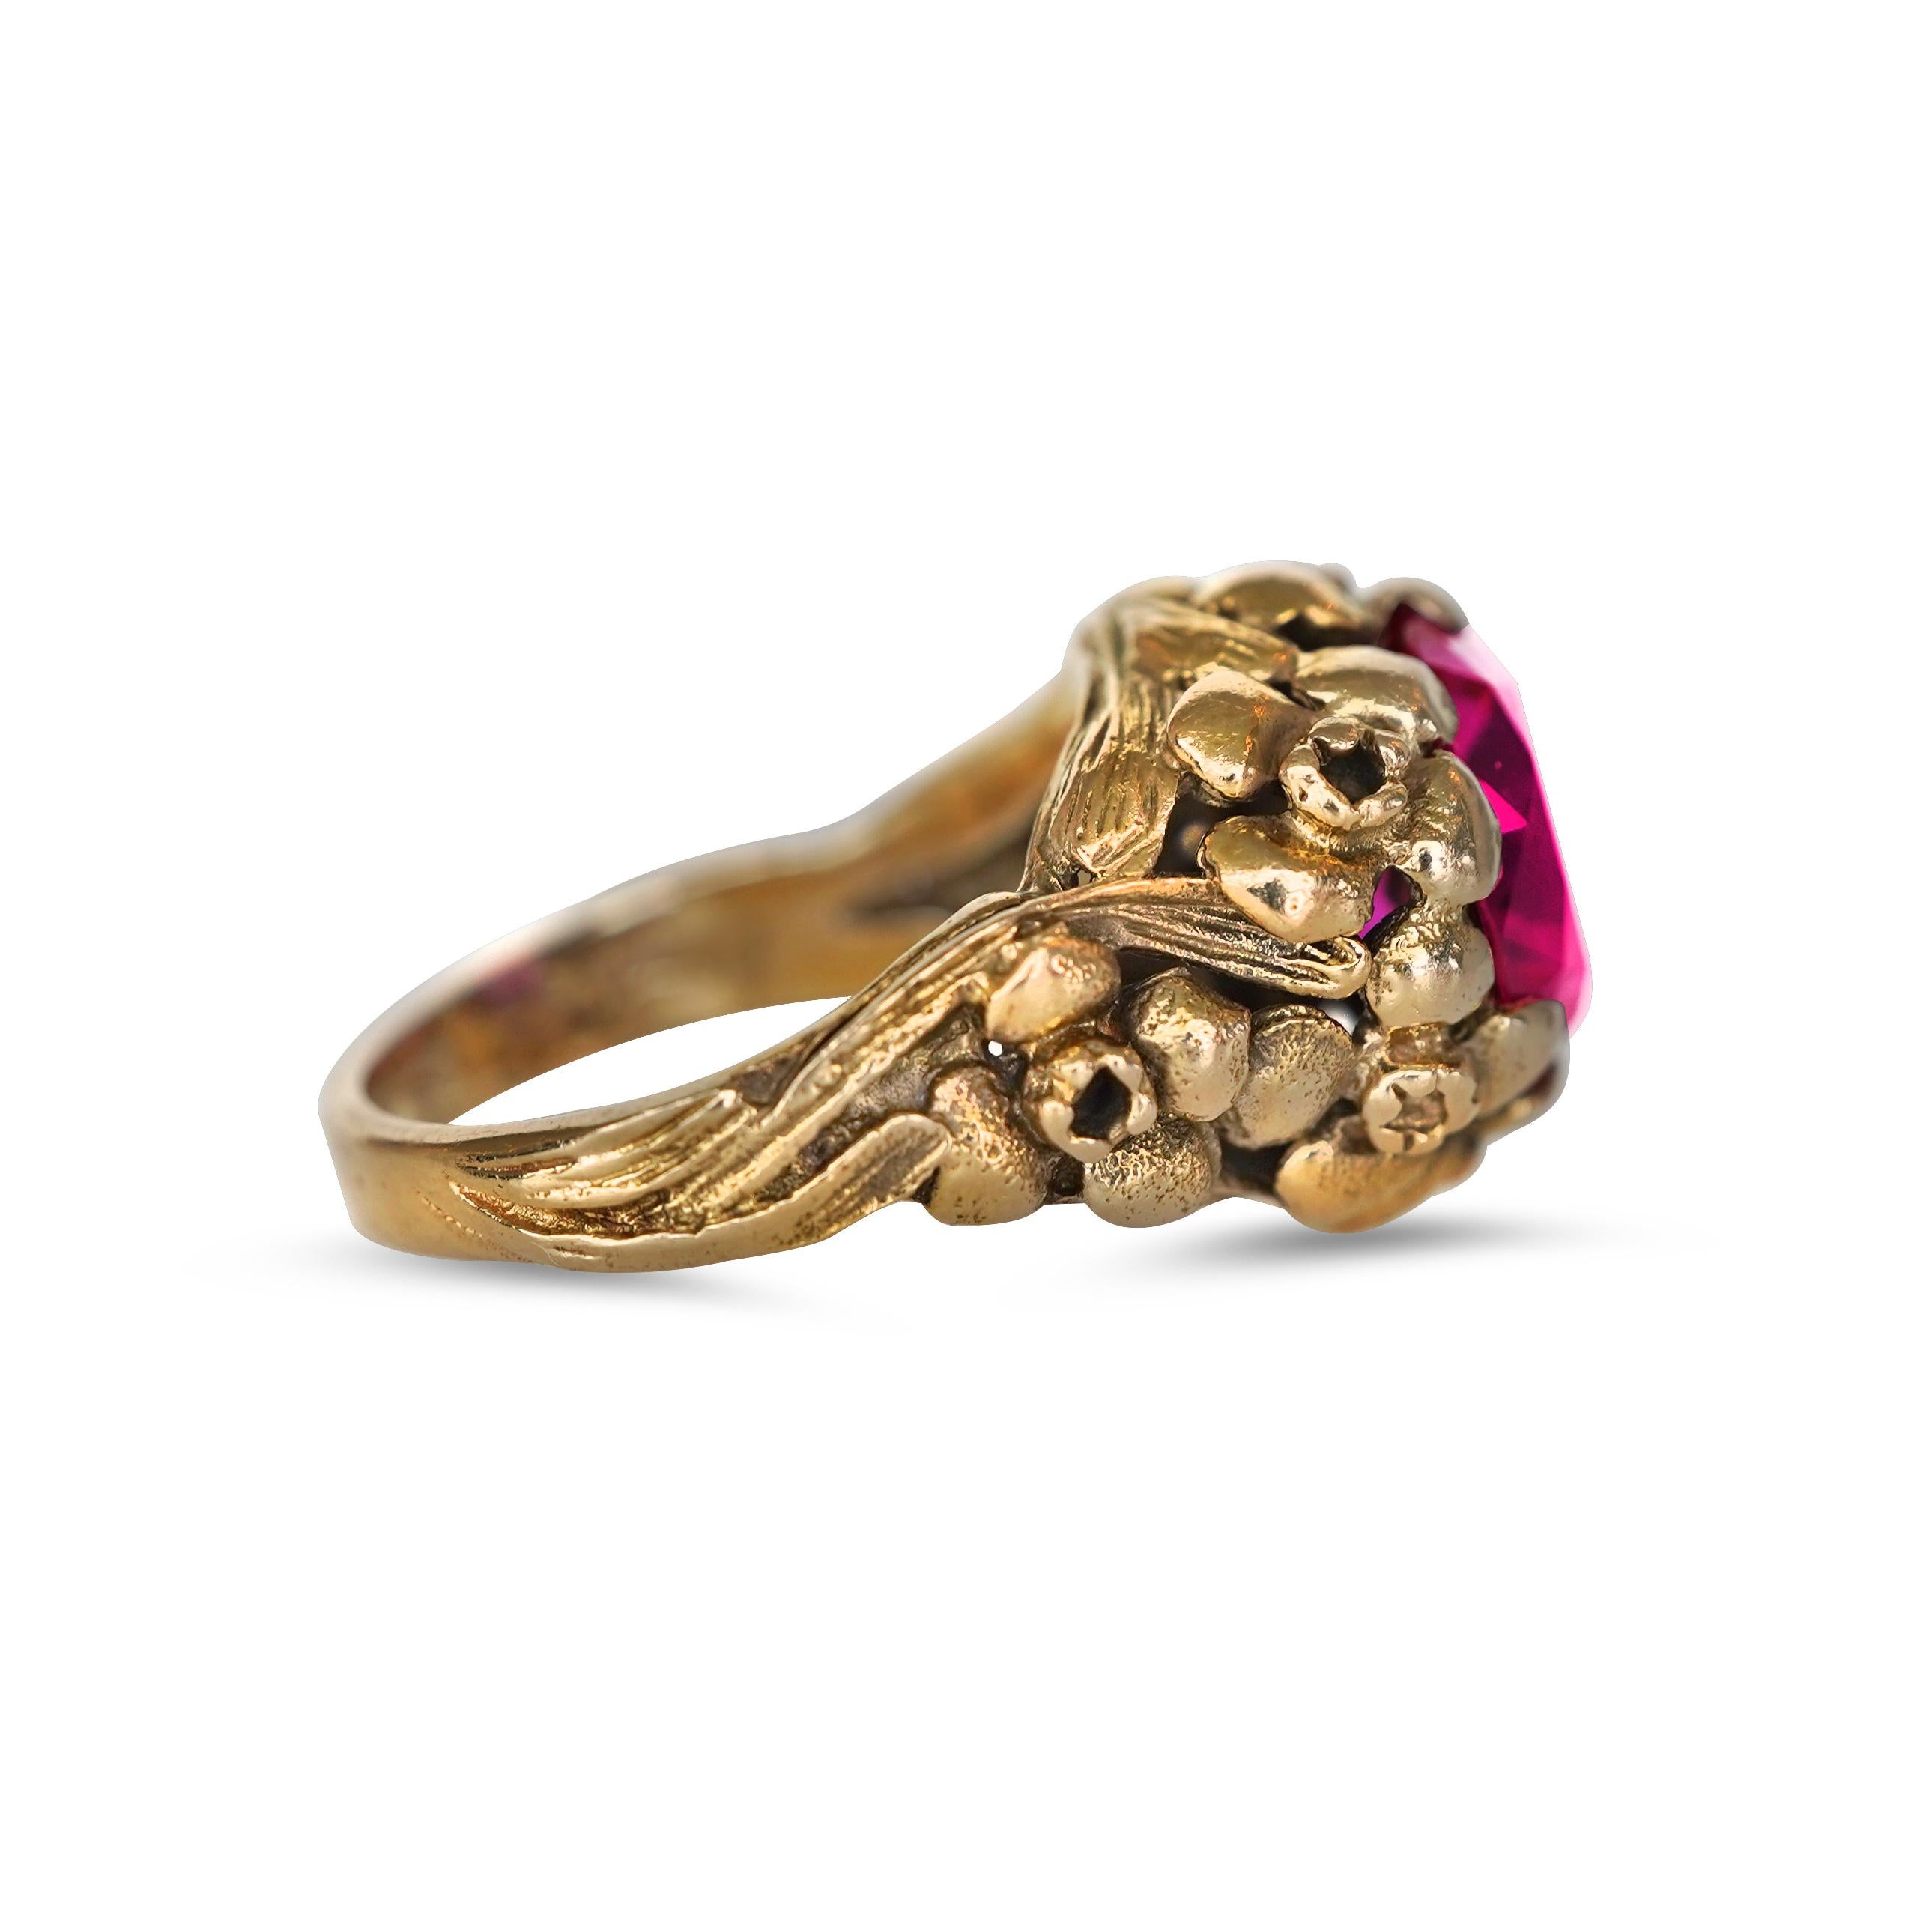 14K Vintage Yellow Gold Pink Sapphire Dome Ring. The center stone is round, brilliant cut, eye clean and unmodified. 
Head length: 13.28mm.
Stone weight: 3.50 carat.
Inner circumference of the ring: 5.8cm. 
Ring weight: 8.53g.